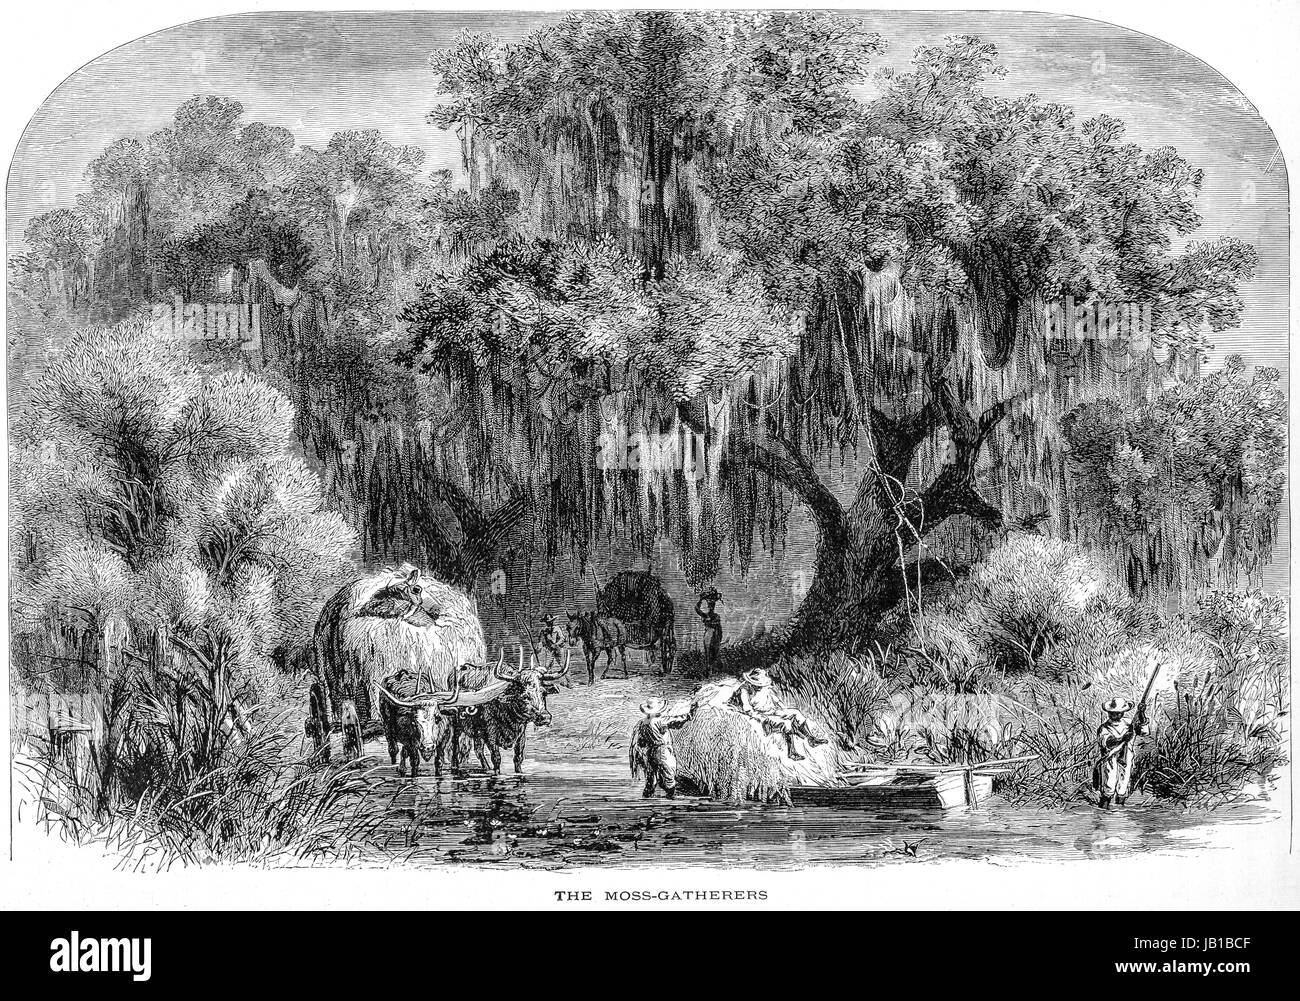 Engraving of the Moss Gatherers on the banks of the Lower Mississippi scanned at high resolution from a book printed in 1872. Believed copyright free. Stock Photo